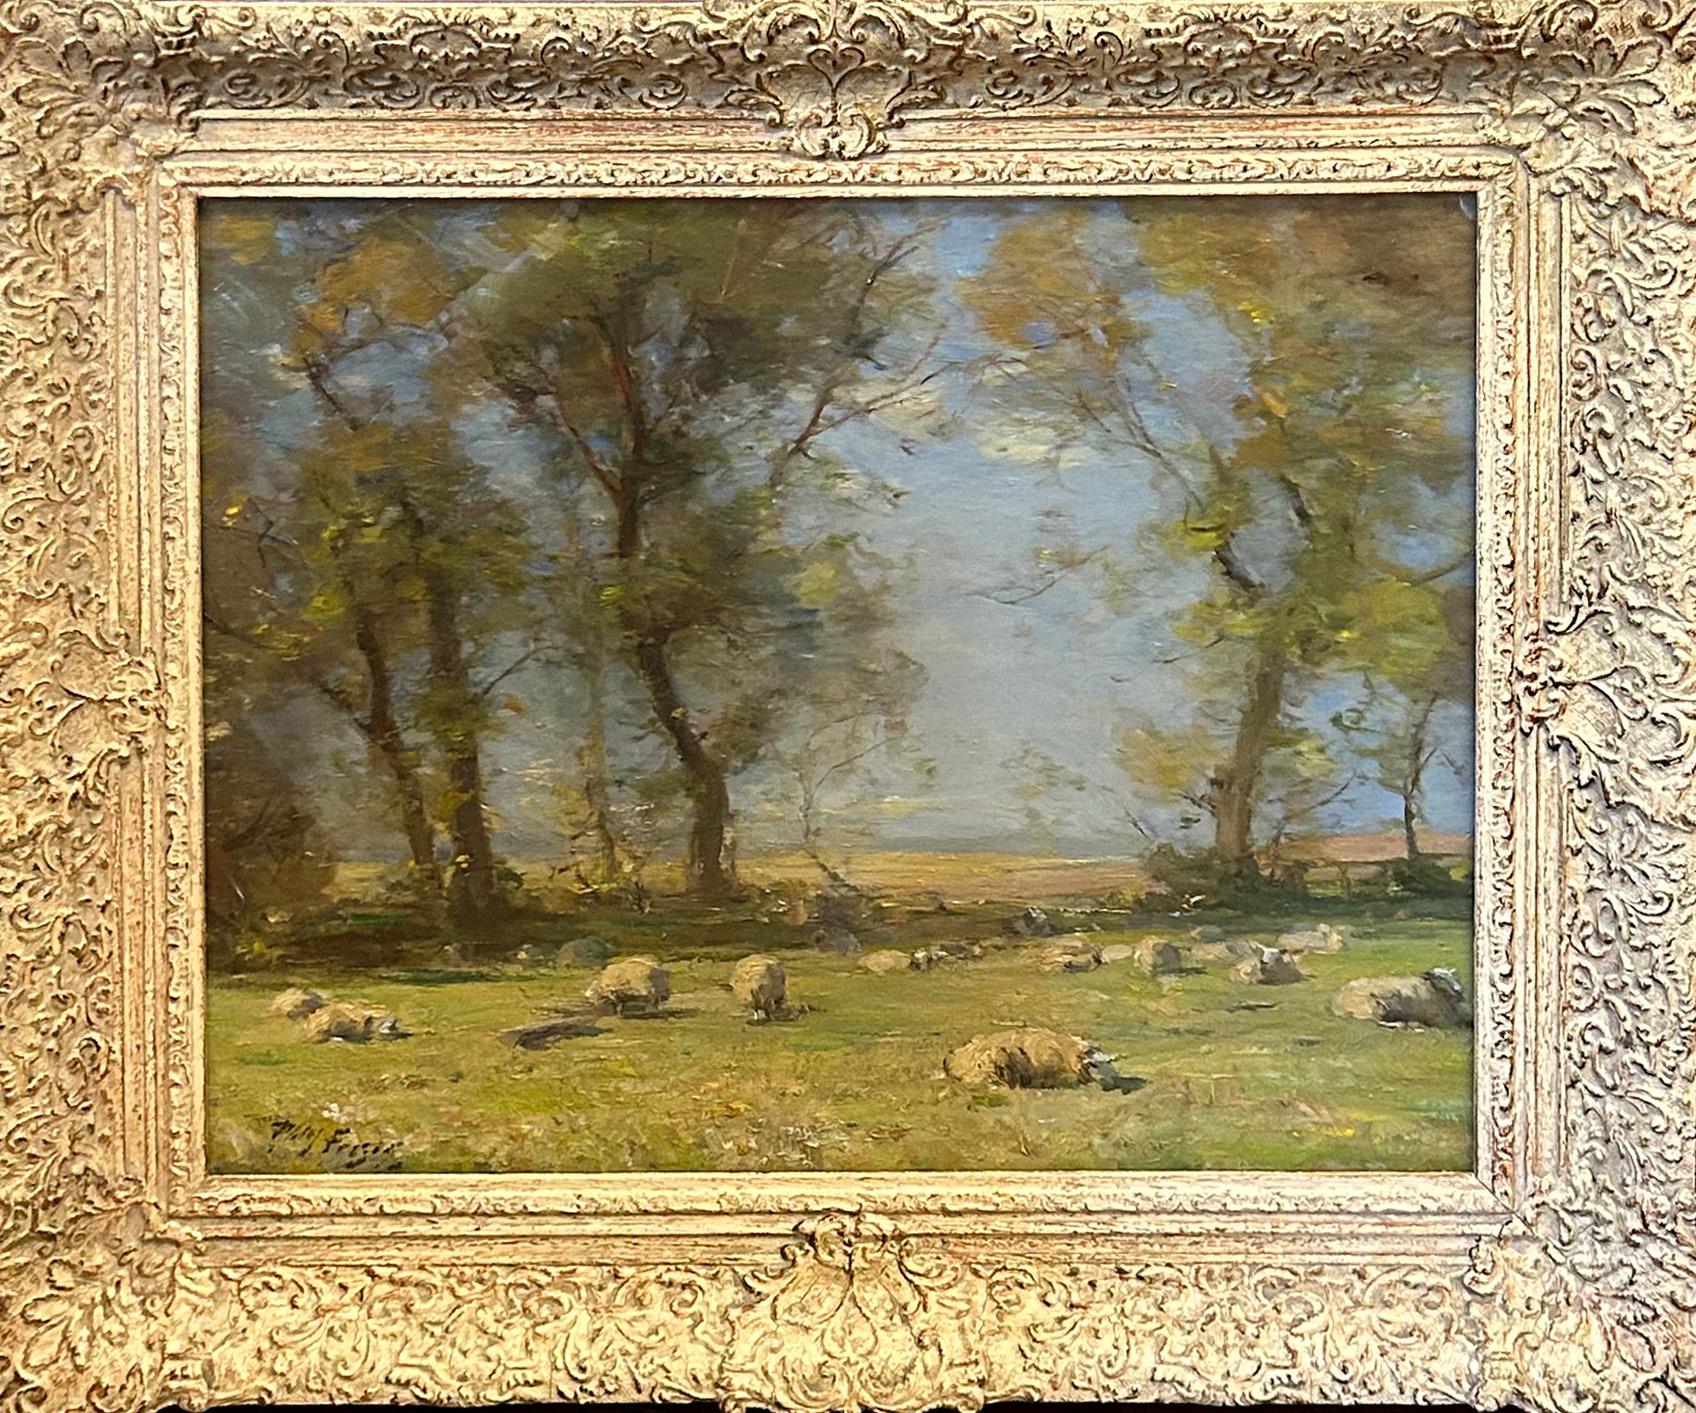 A Summer's Day, impressionist, early 20th century, oil on canvas